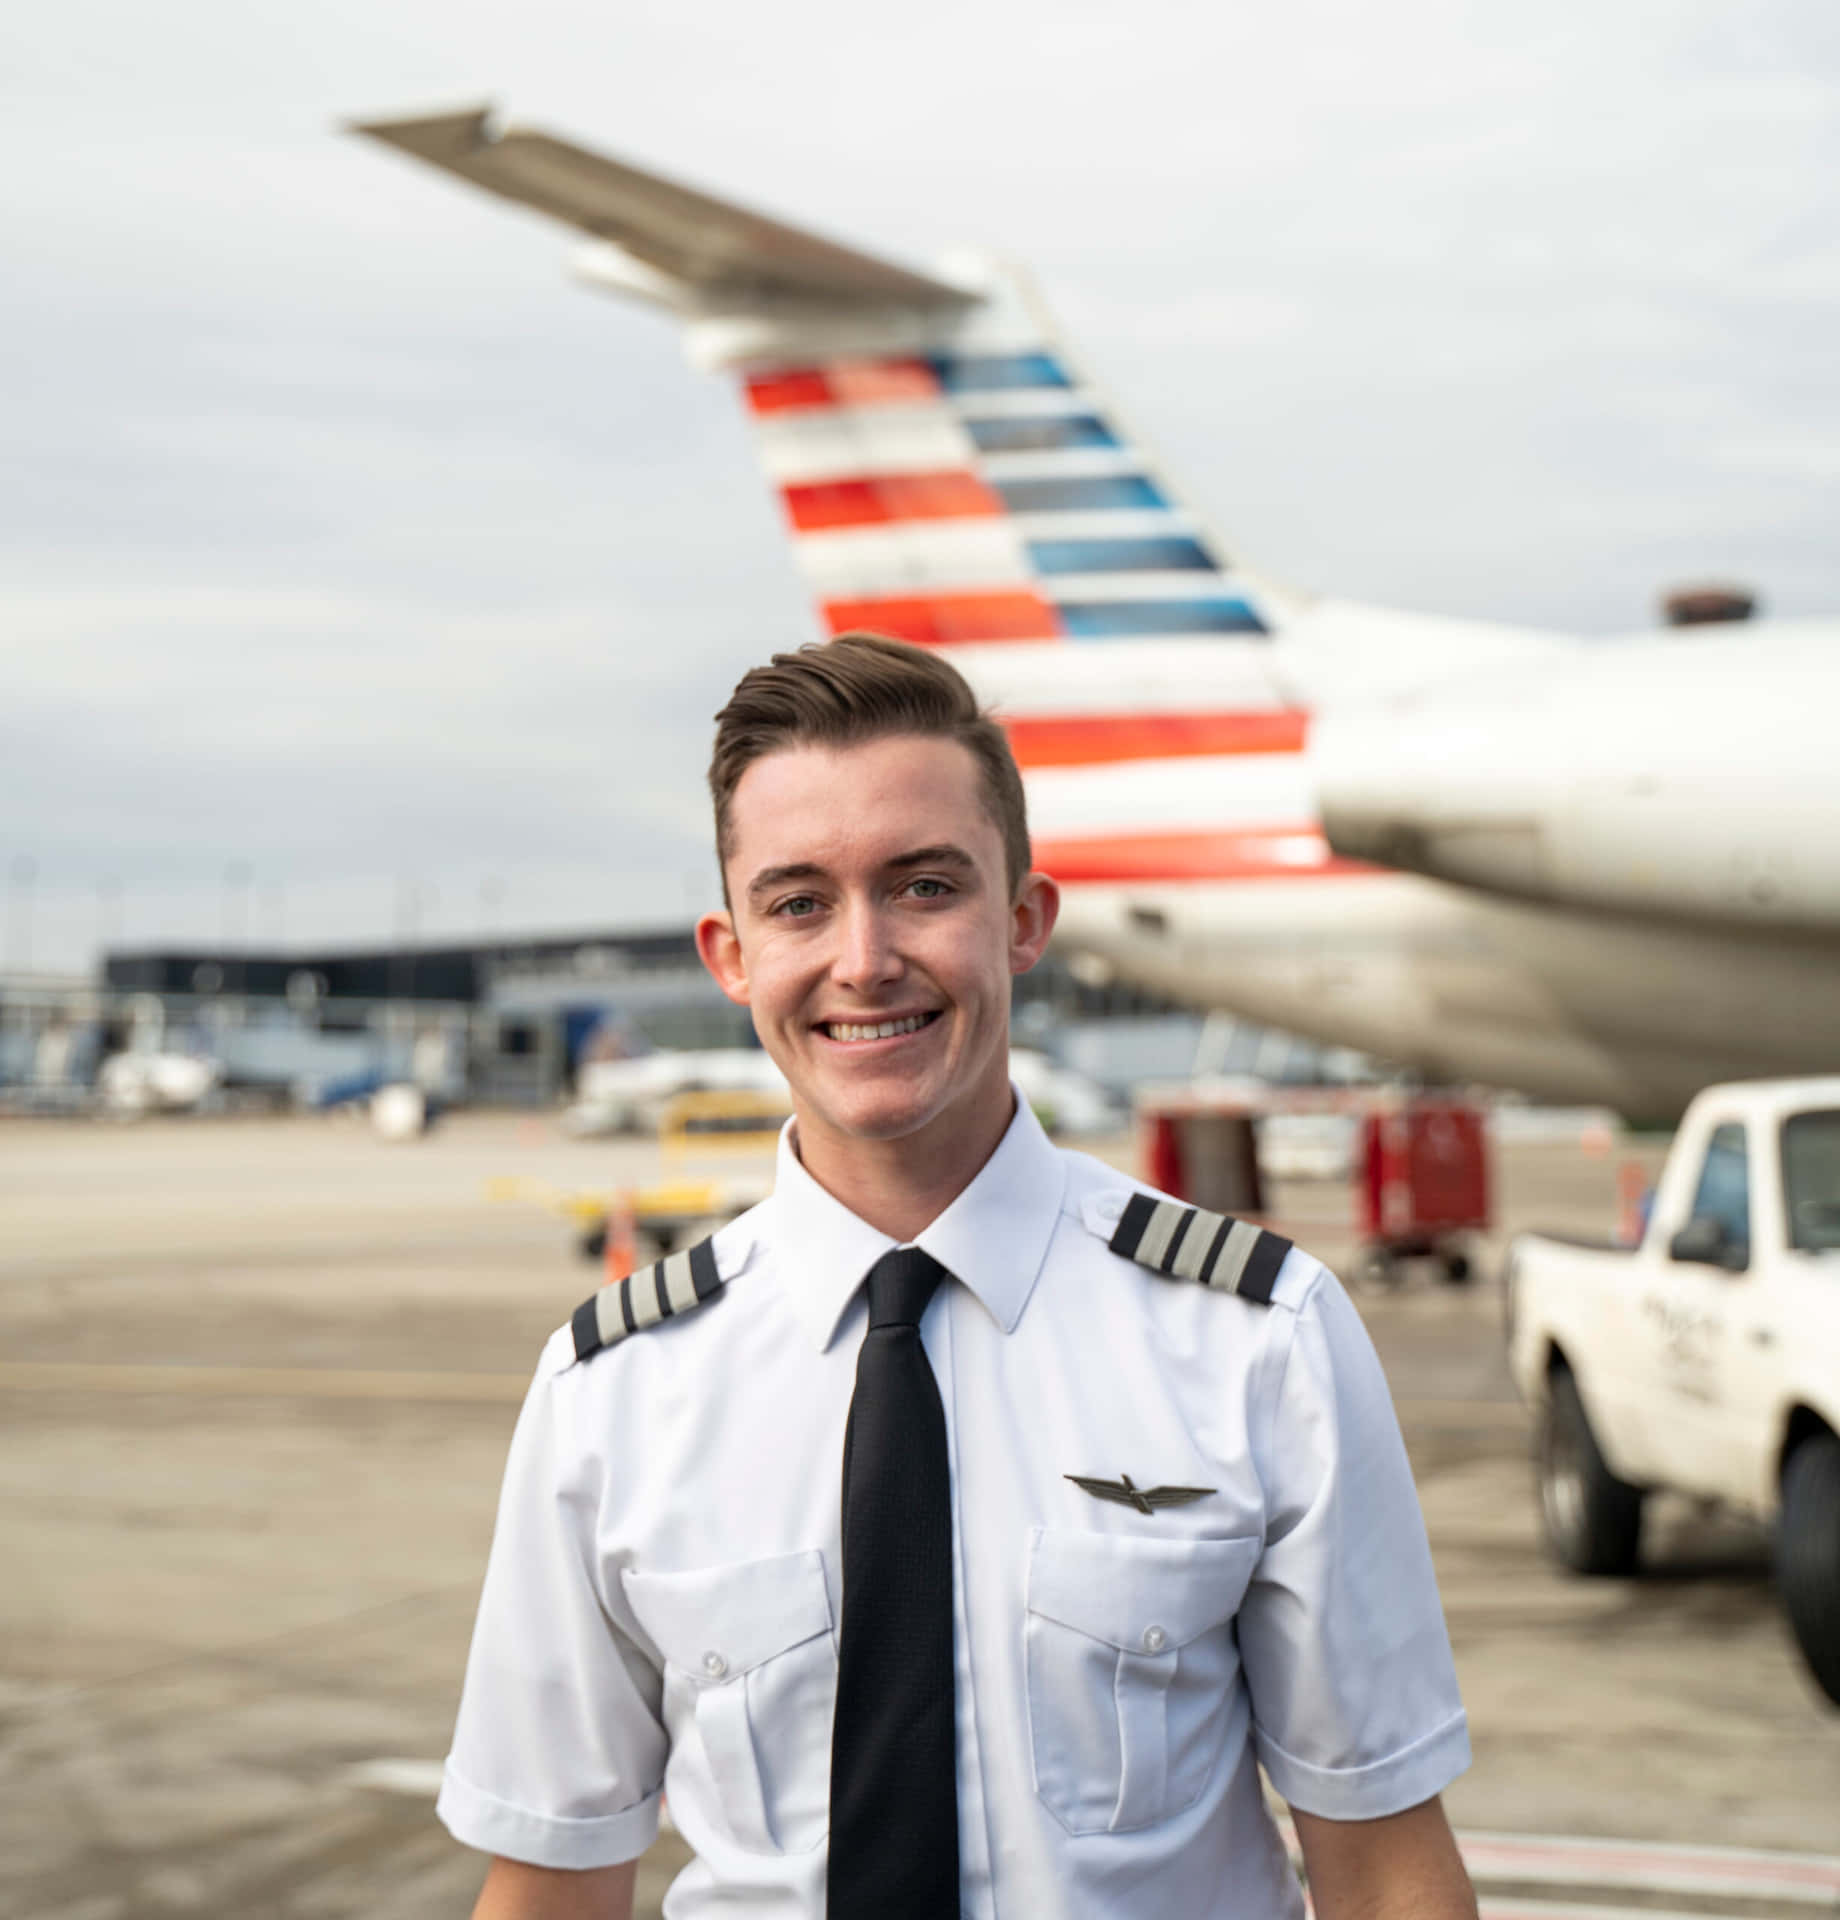 Young Man Pilot In Airport